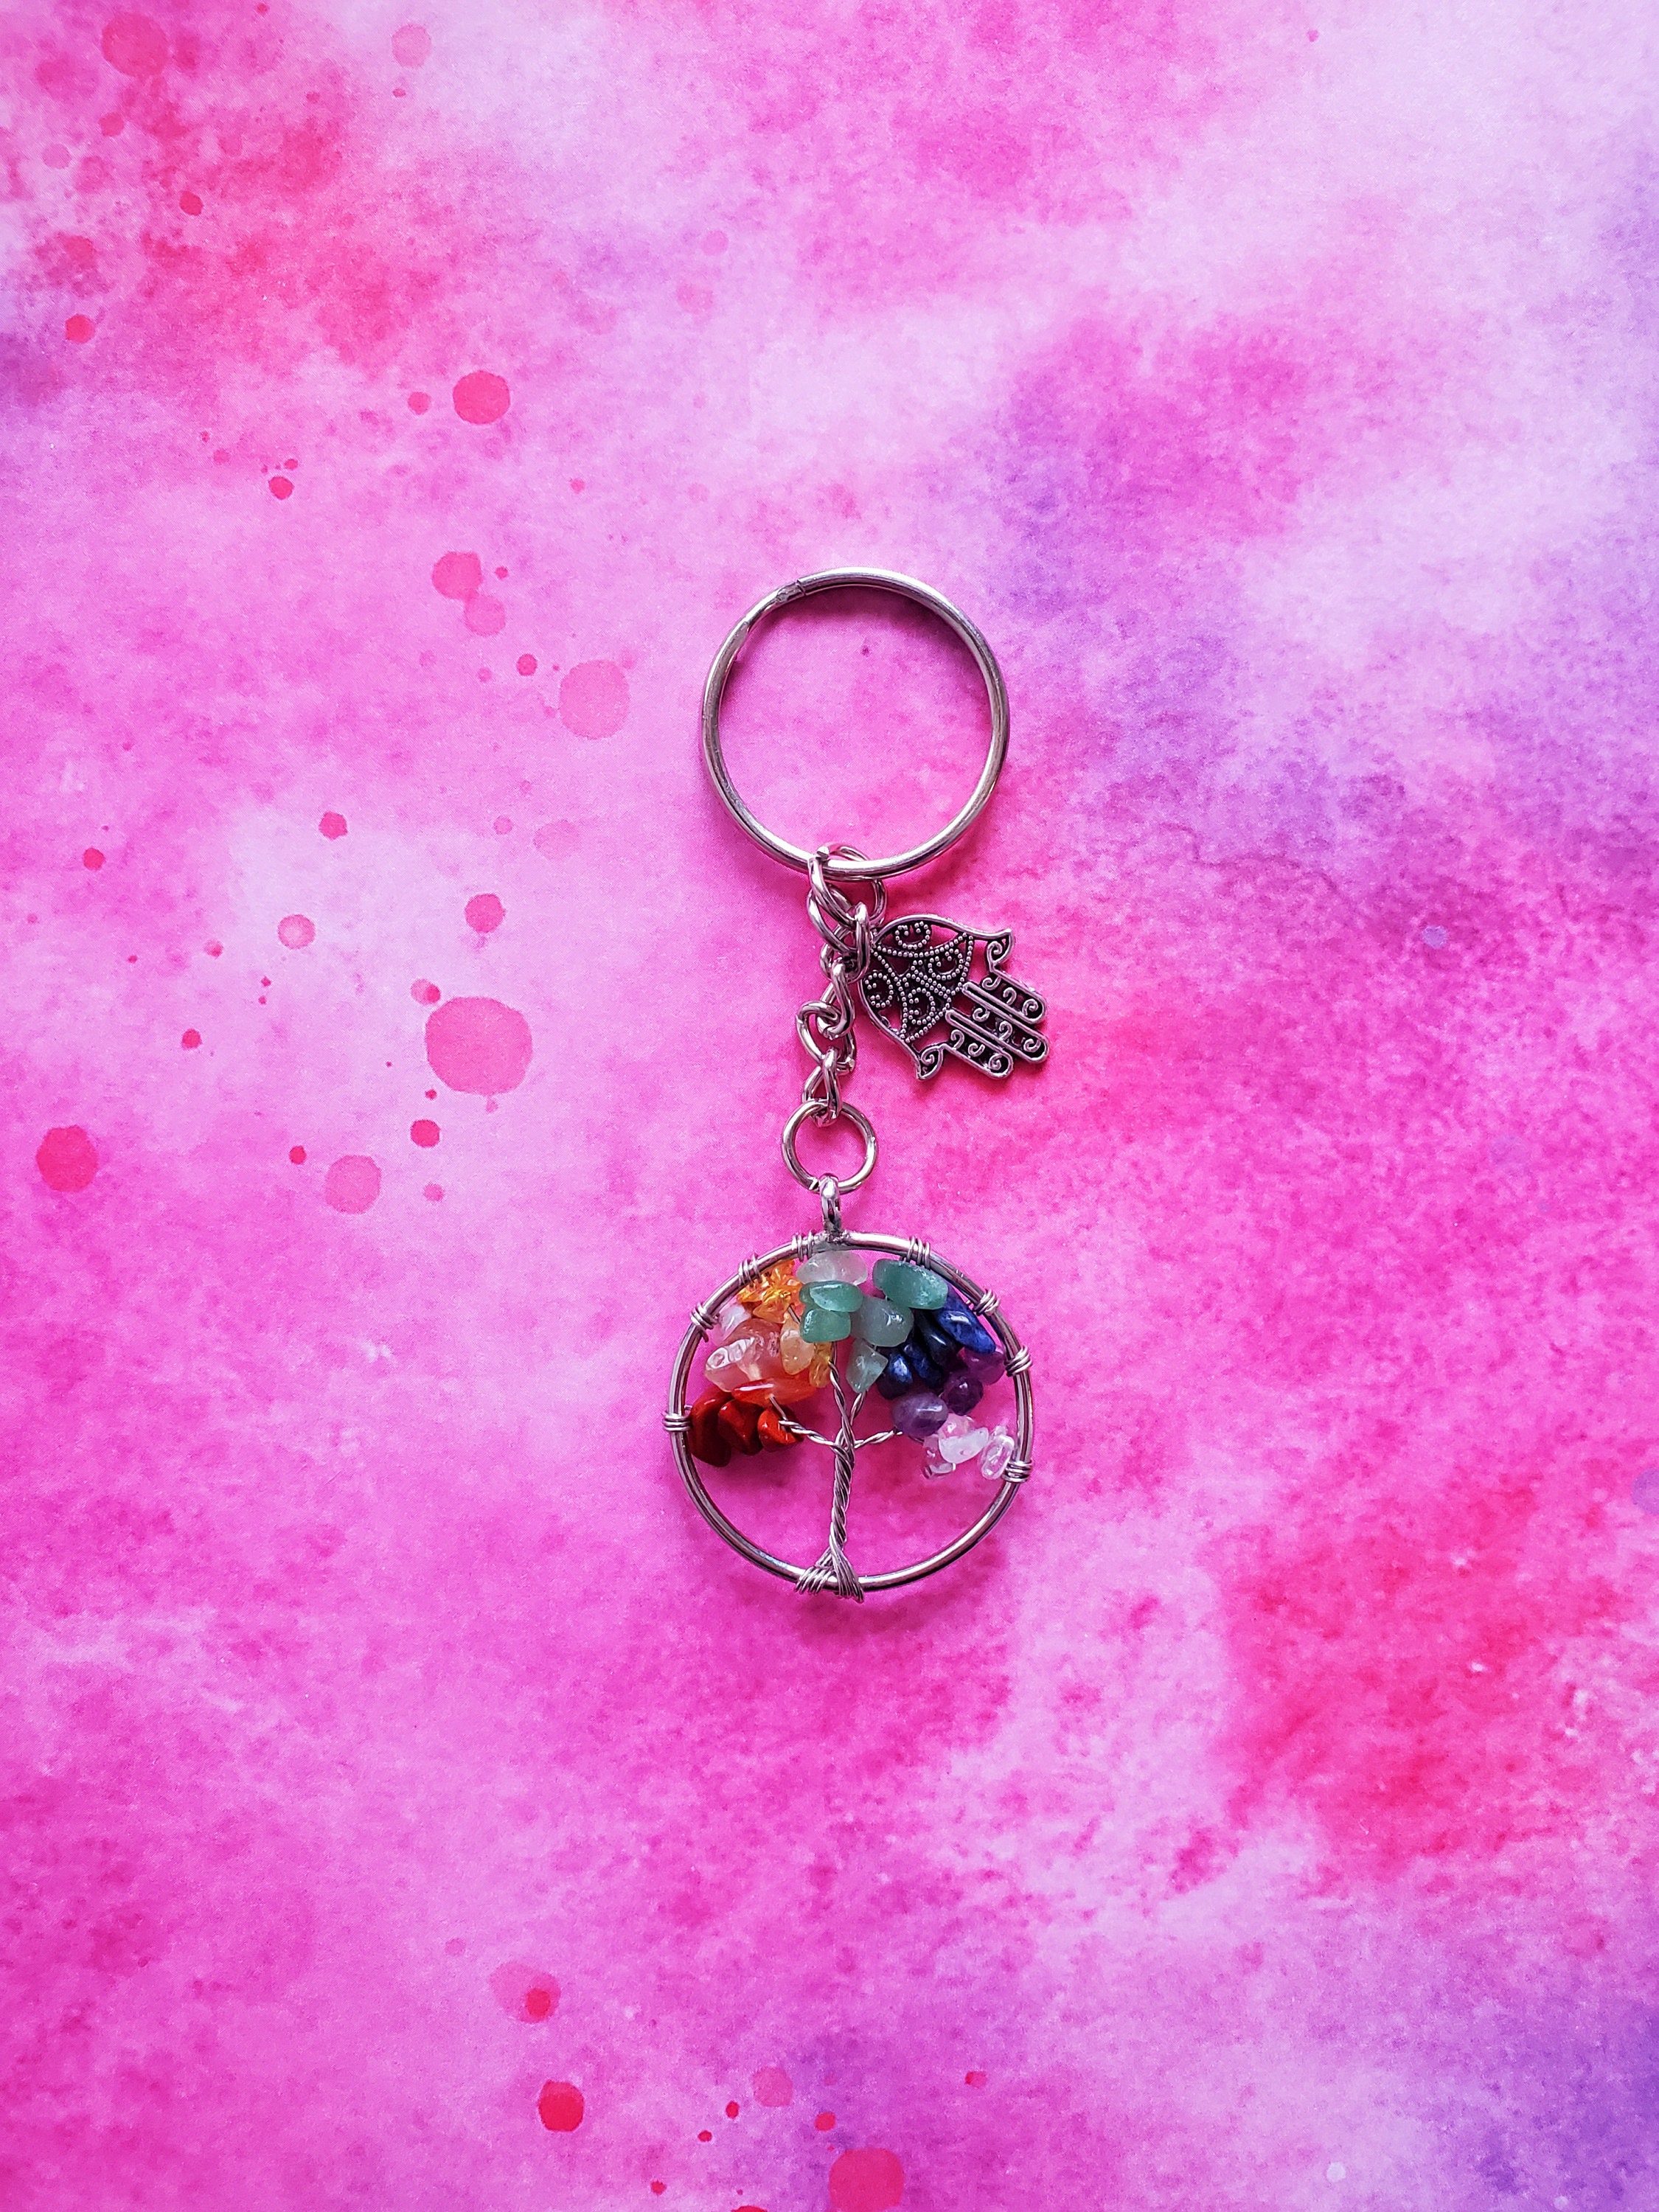 Top Plaza 7 Chakra Healing Crystals Stone Keychain Tree of Life Keychains  Keyrings Lucky Car Keychain Bag Charm Pendant Accessories Bronze Vintage  Keychains Christmas Gifts - Heart at  Women's Clothing store